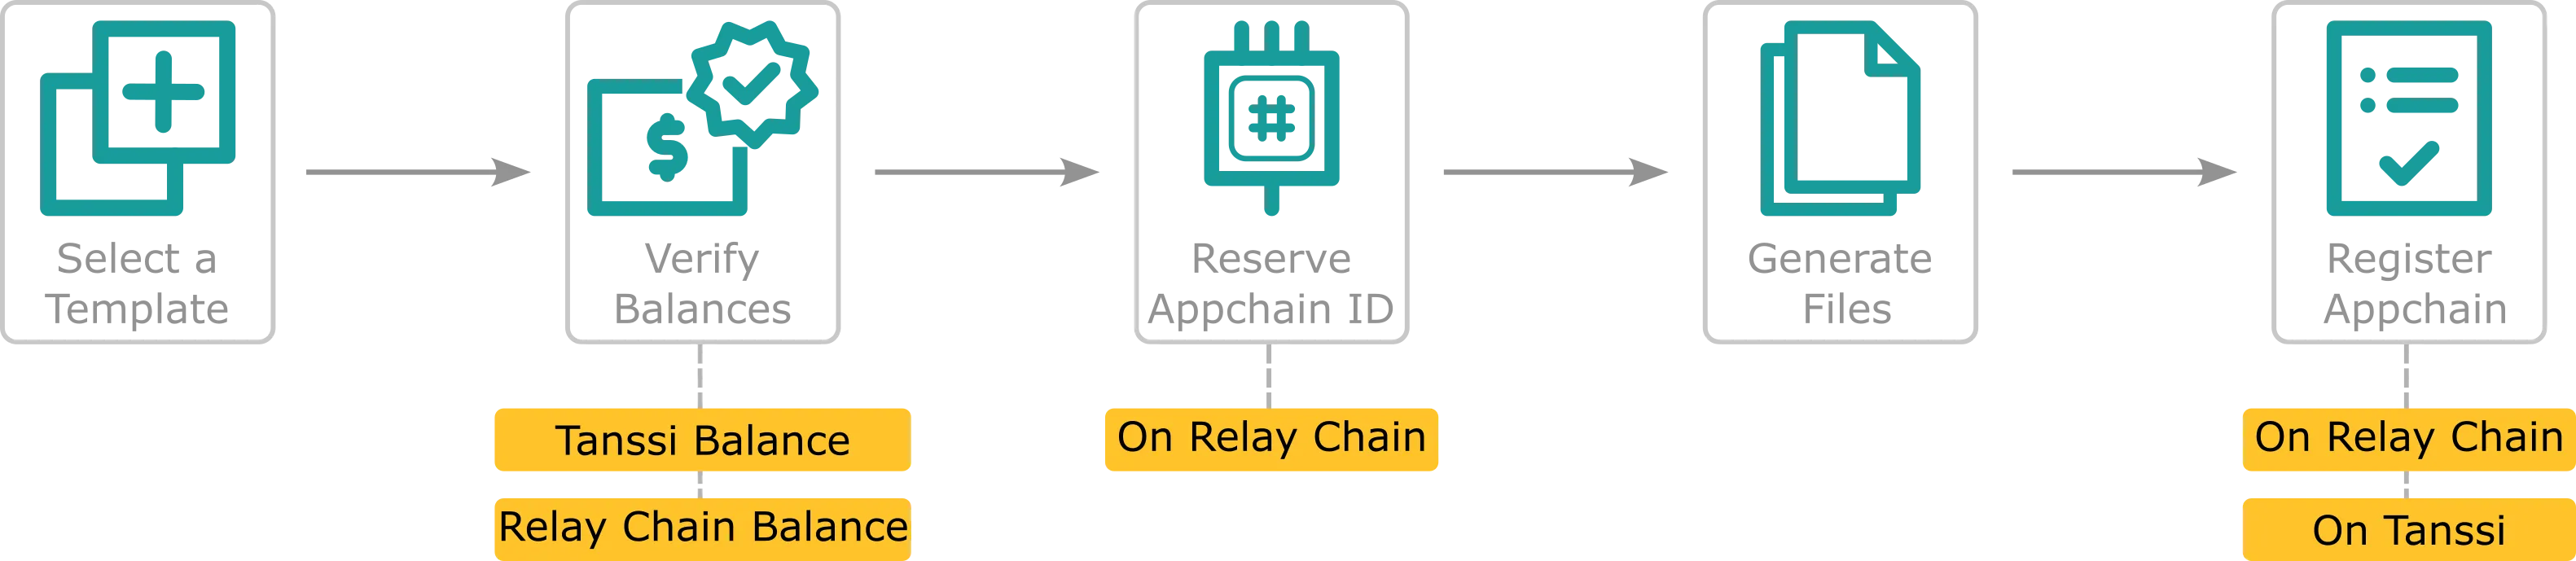 A diagram mapping out the steps for deploying an Appchain with the Tanssi dApp.